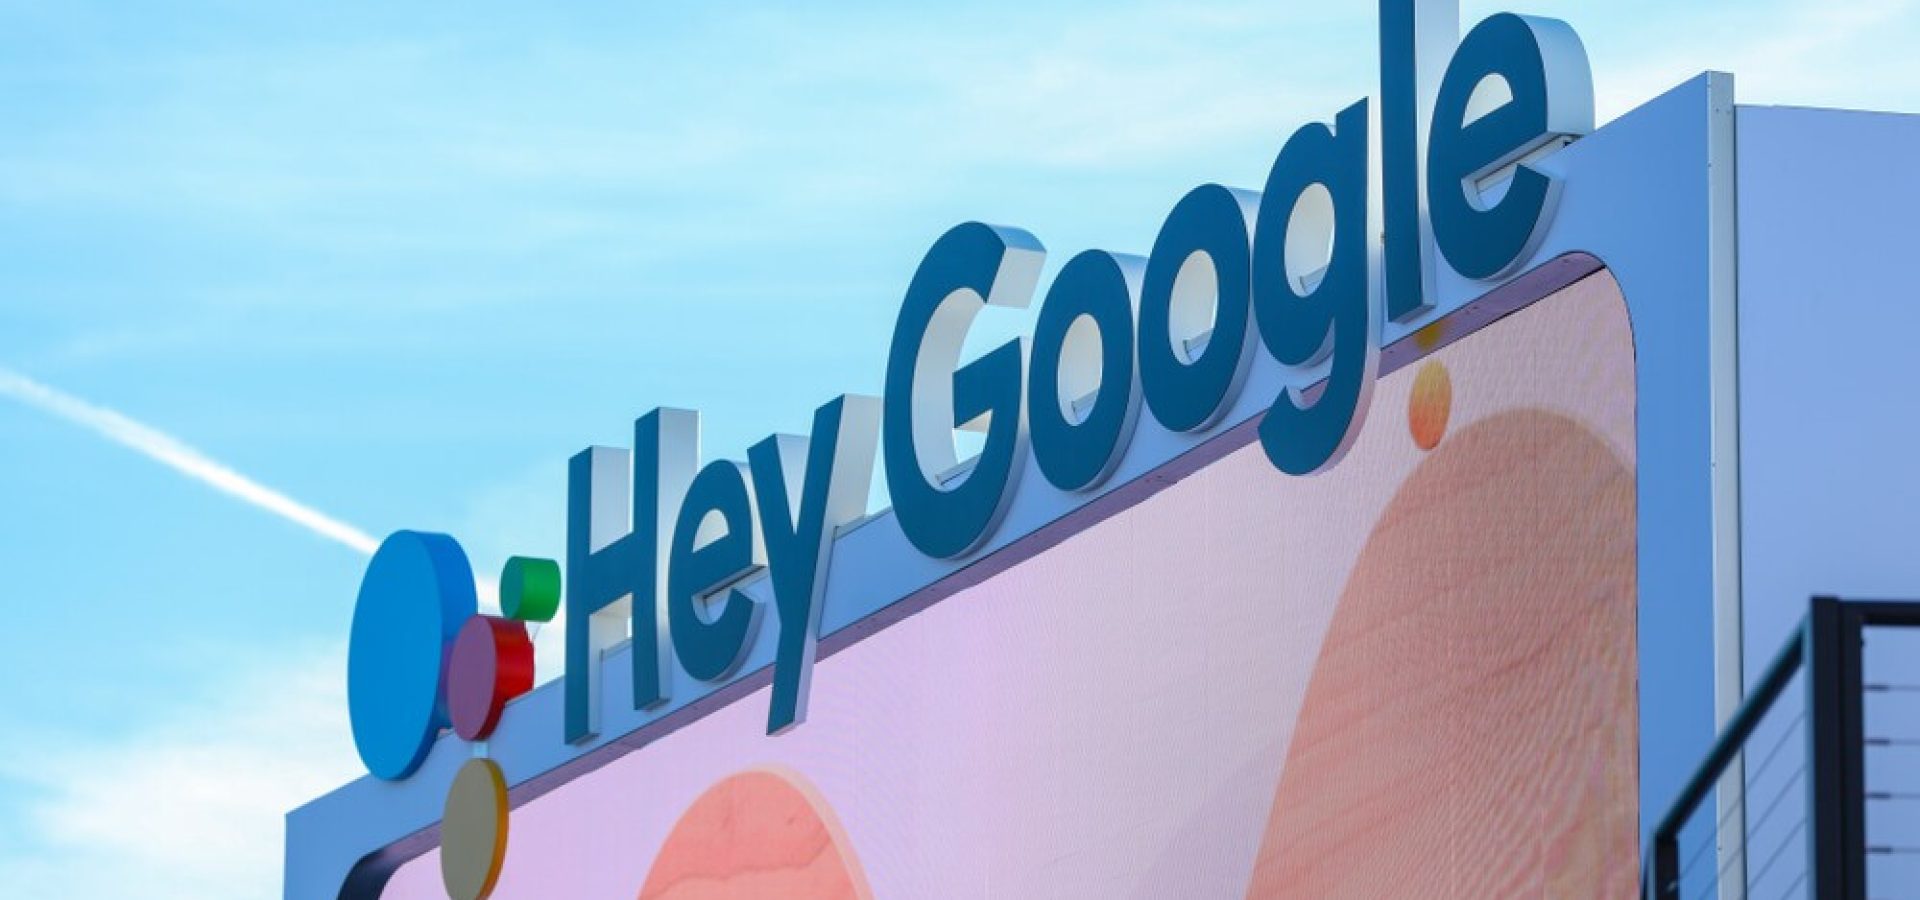 “Hey Google” written at the top of the temporary building with a large screen.